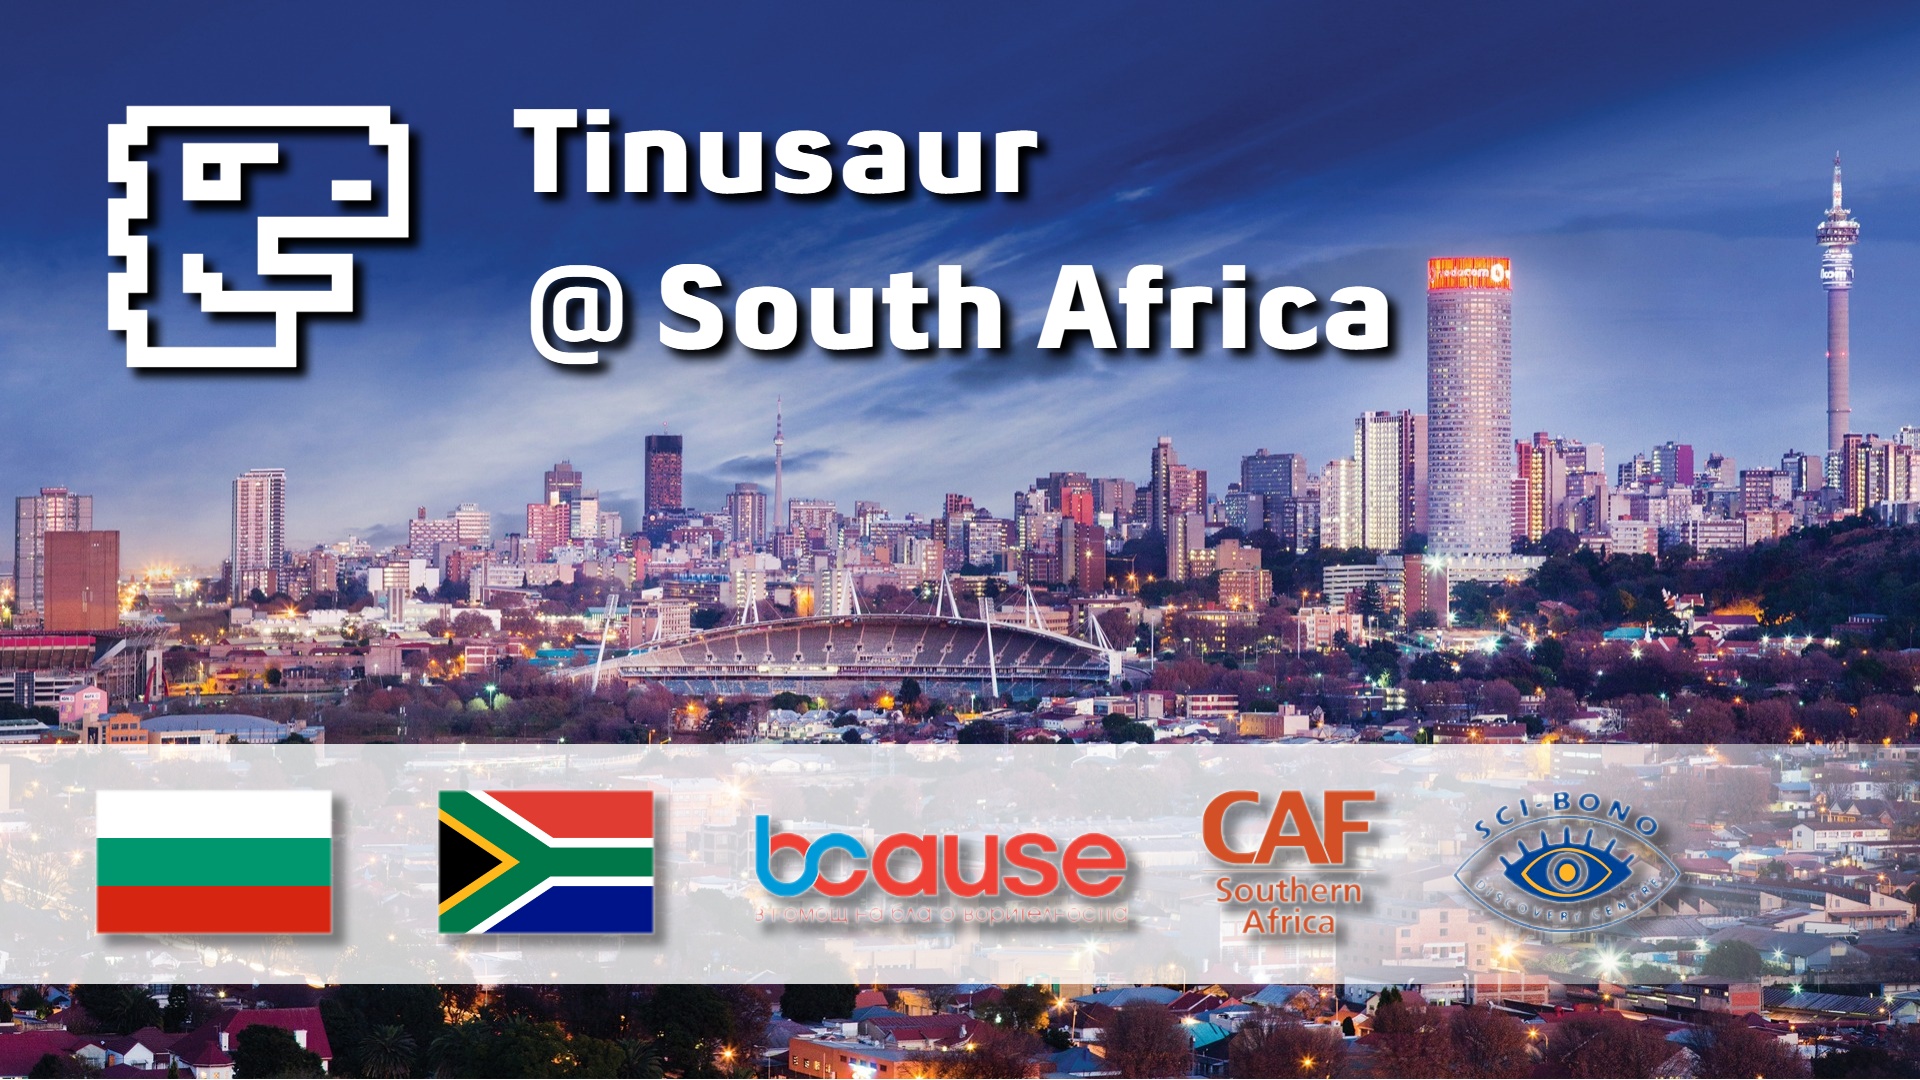 The Tinusaur team will train students and teachers in South Africa